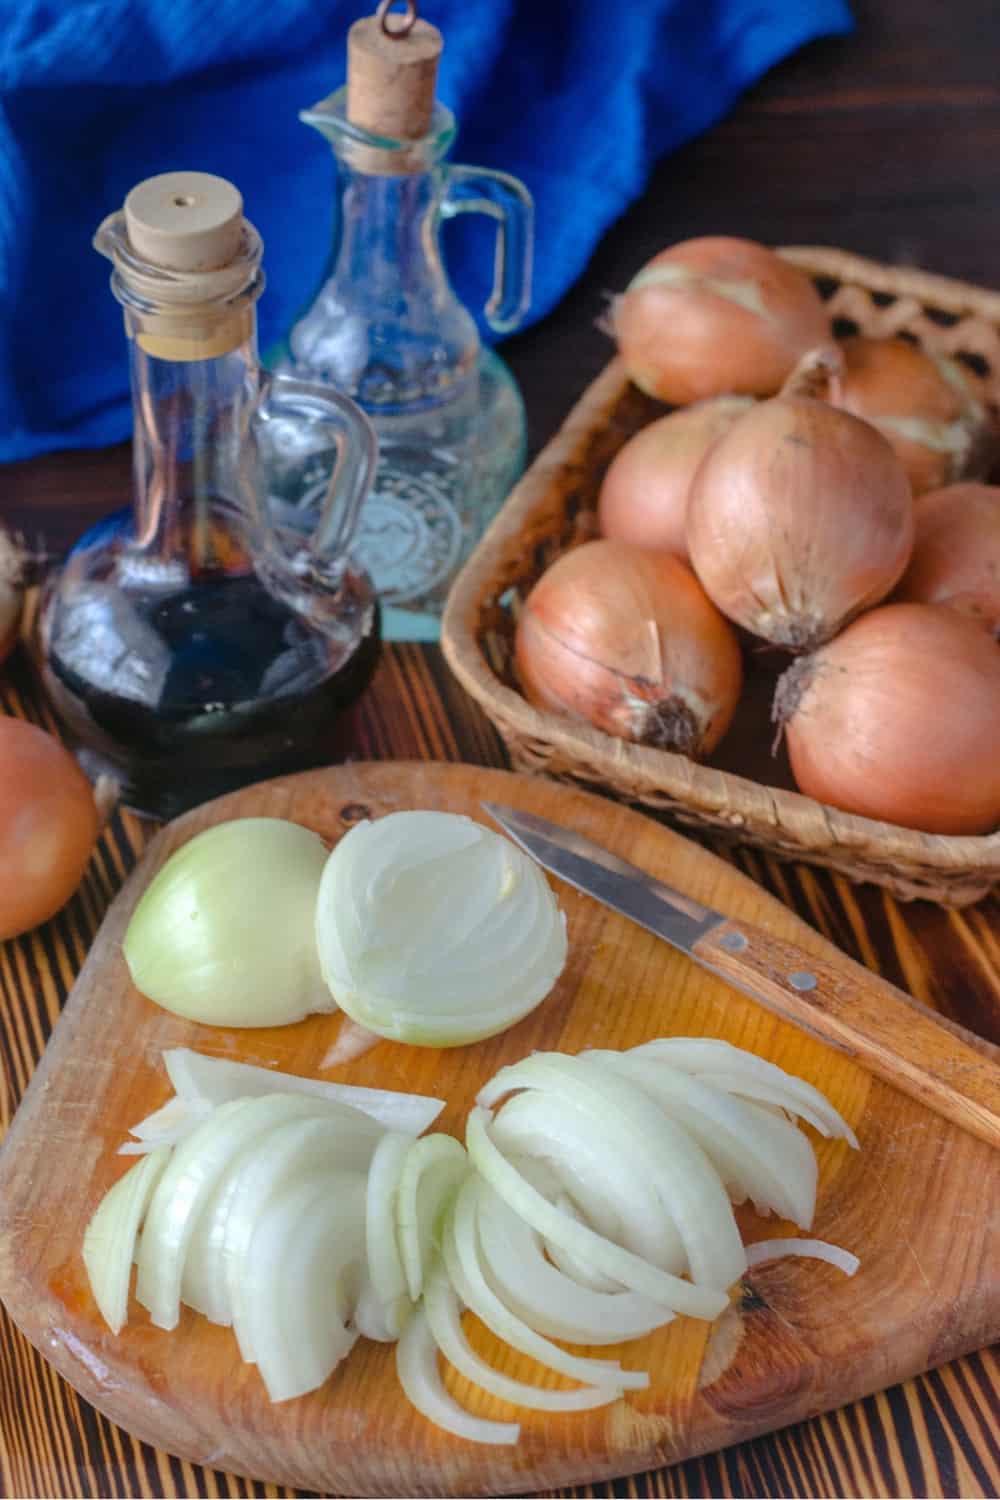 photo of cut up onion on wooden cutting board